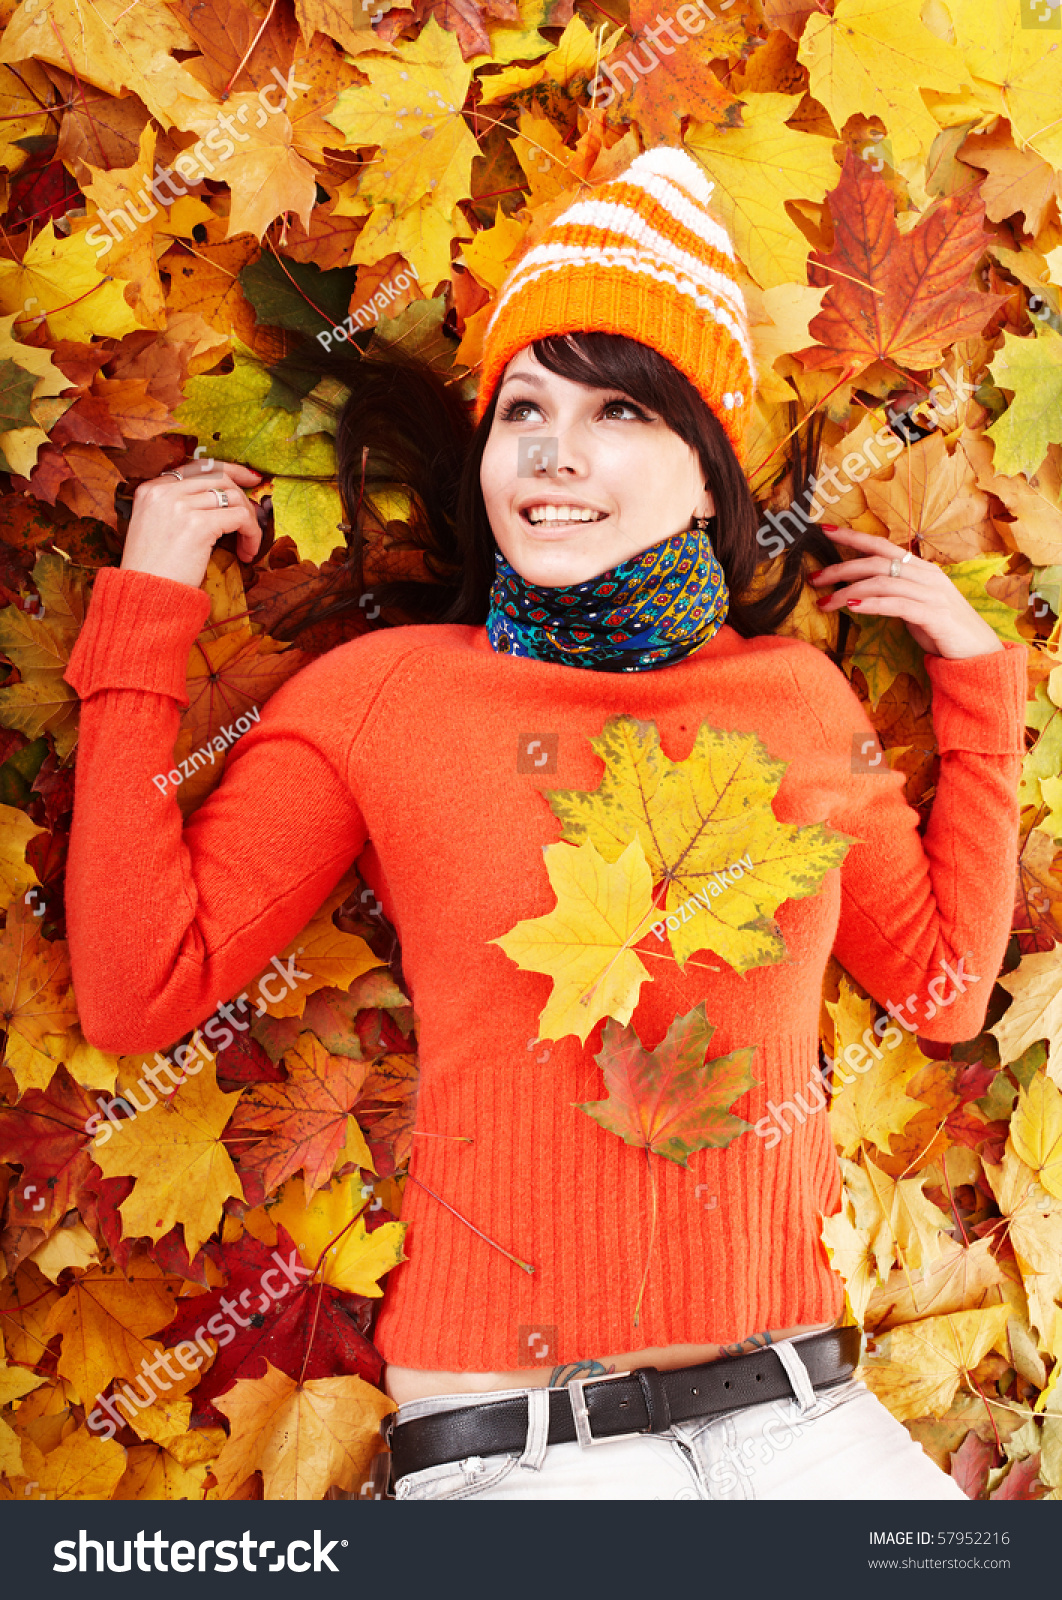 Young woman in autumn orange leaves. Outdoor. #57952216